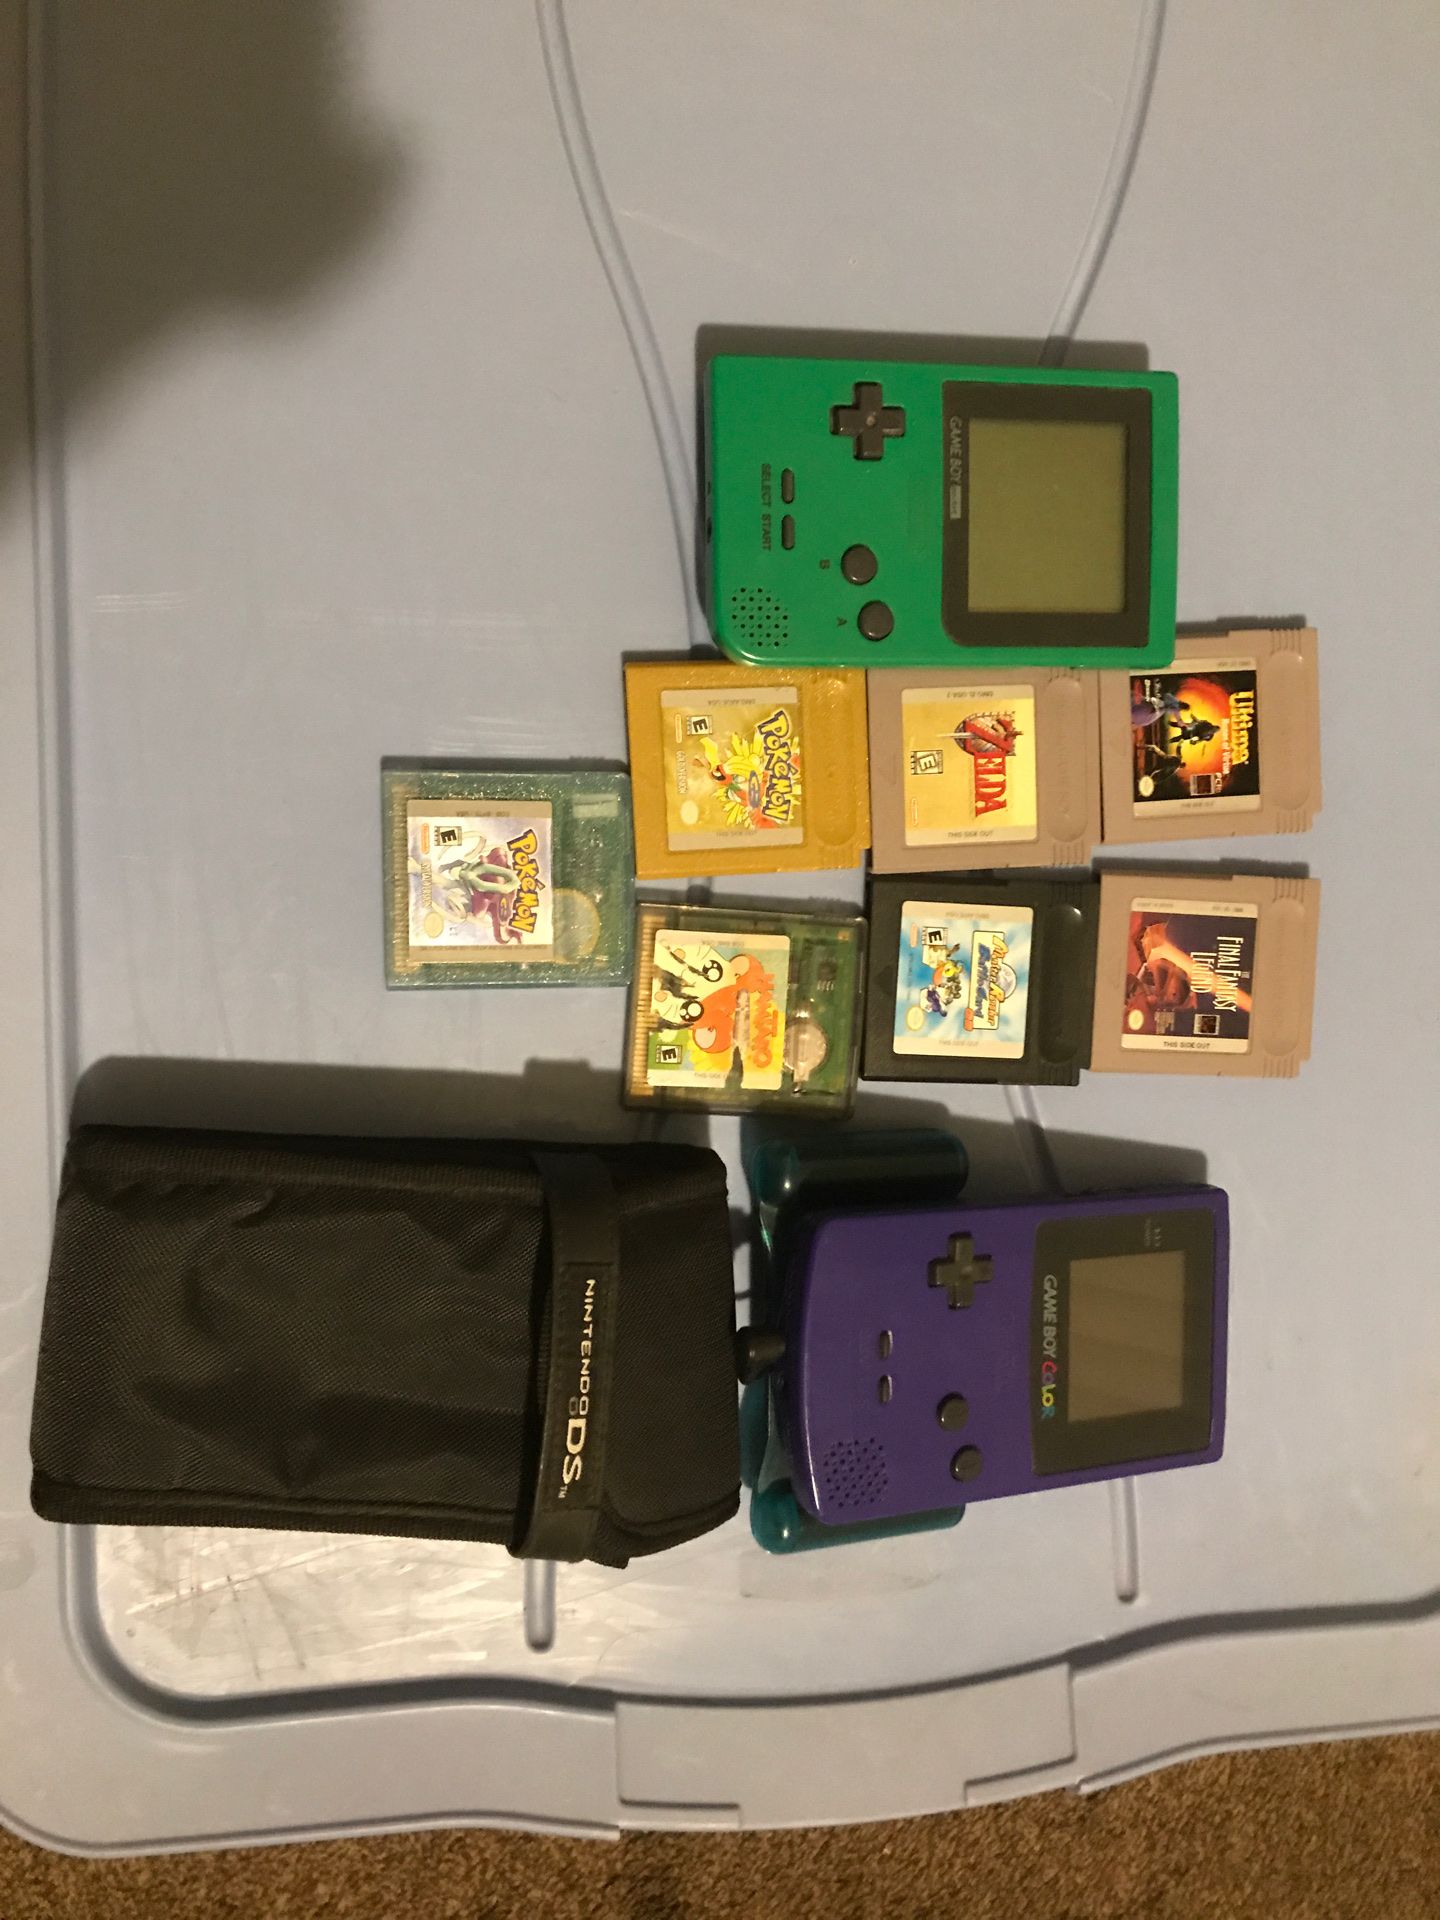 Game boy consoles with games